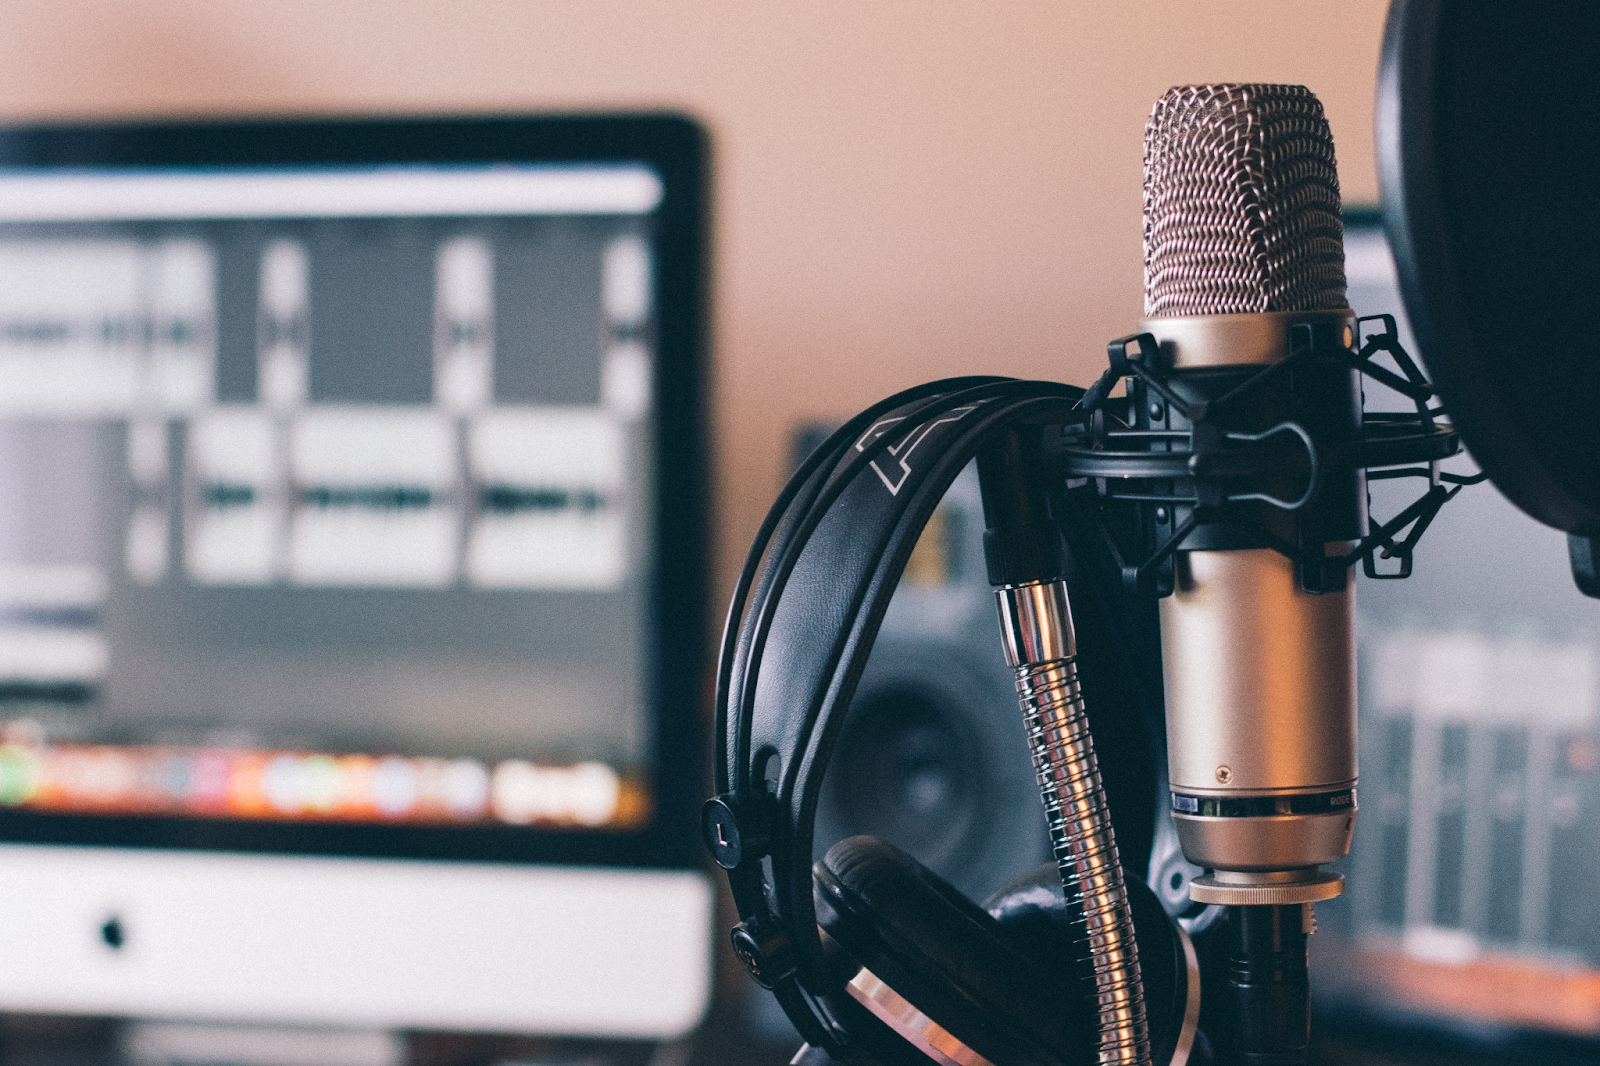 The Ultimate List of Developer Podcasts